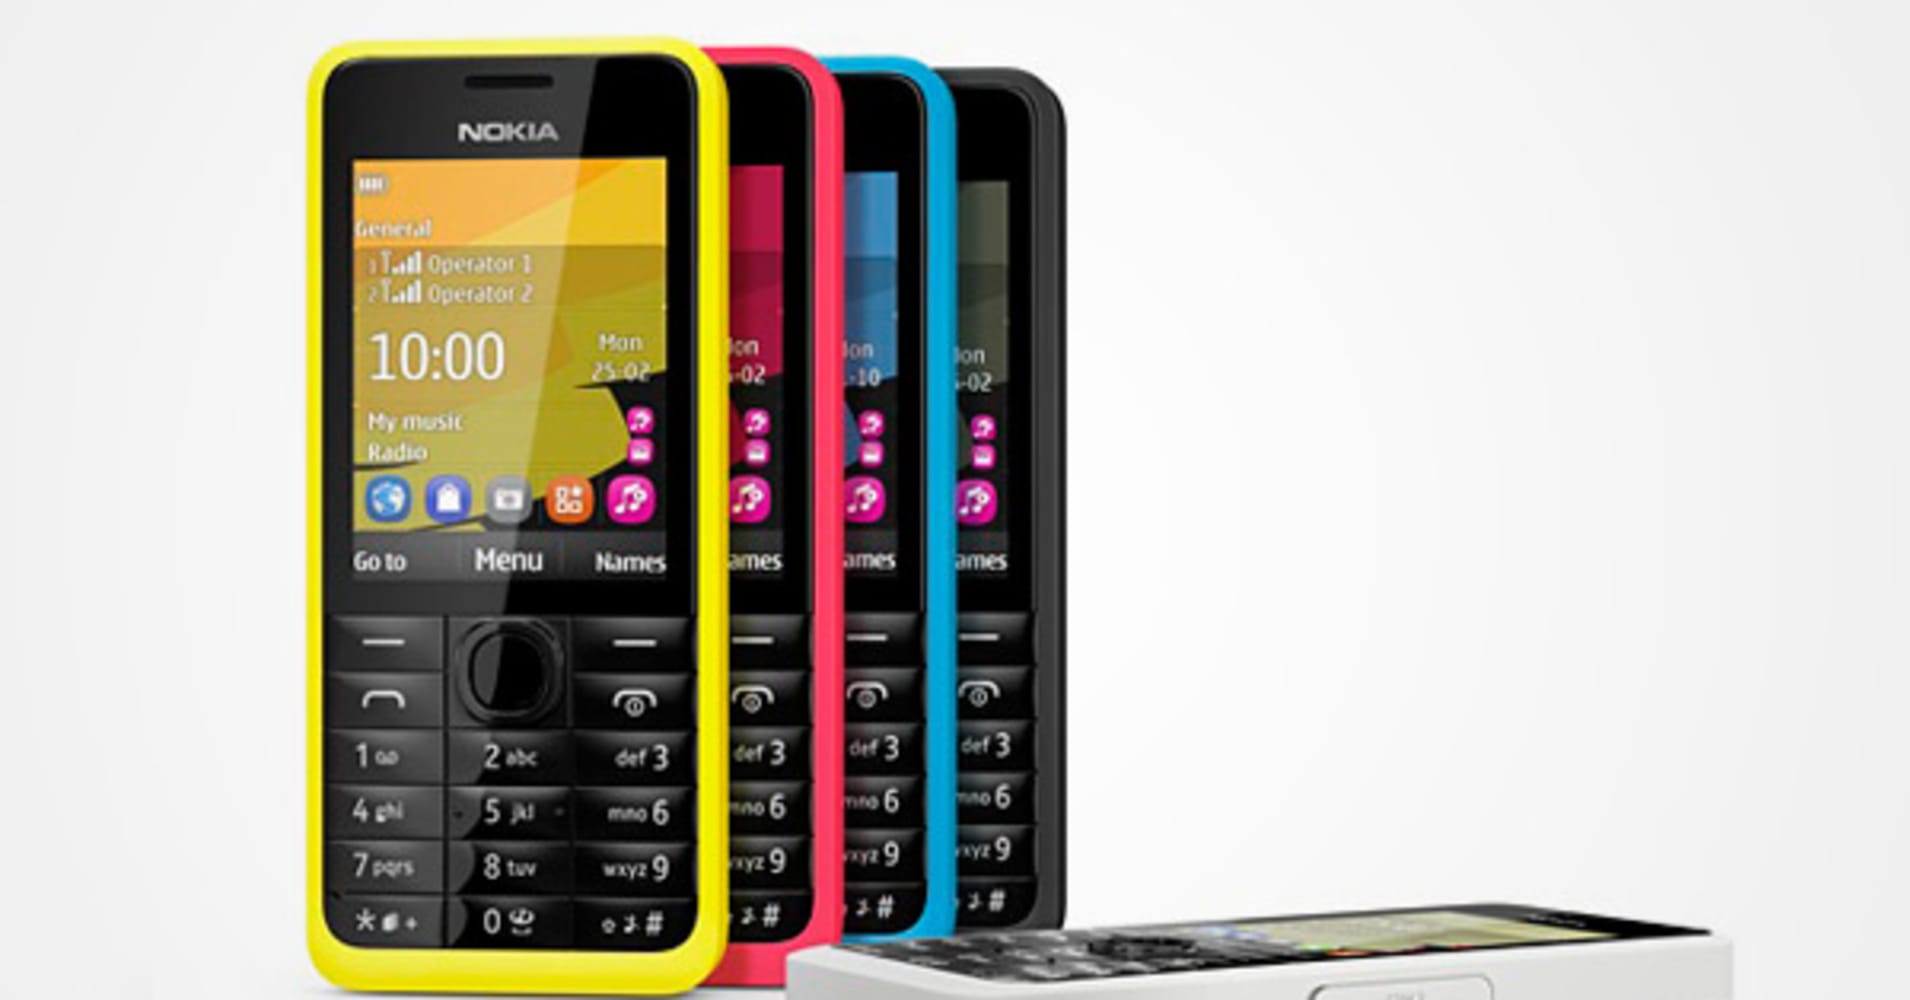 Nokia Targets Developing World With Cheap, Simple Phones